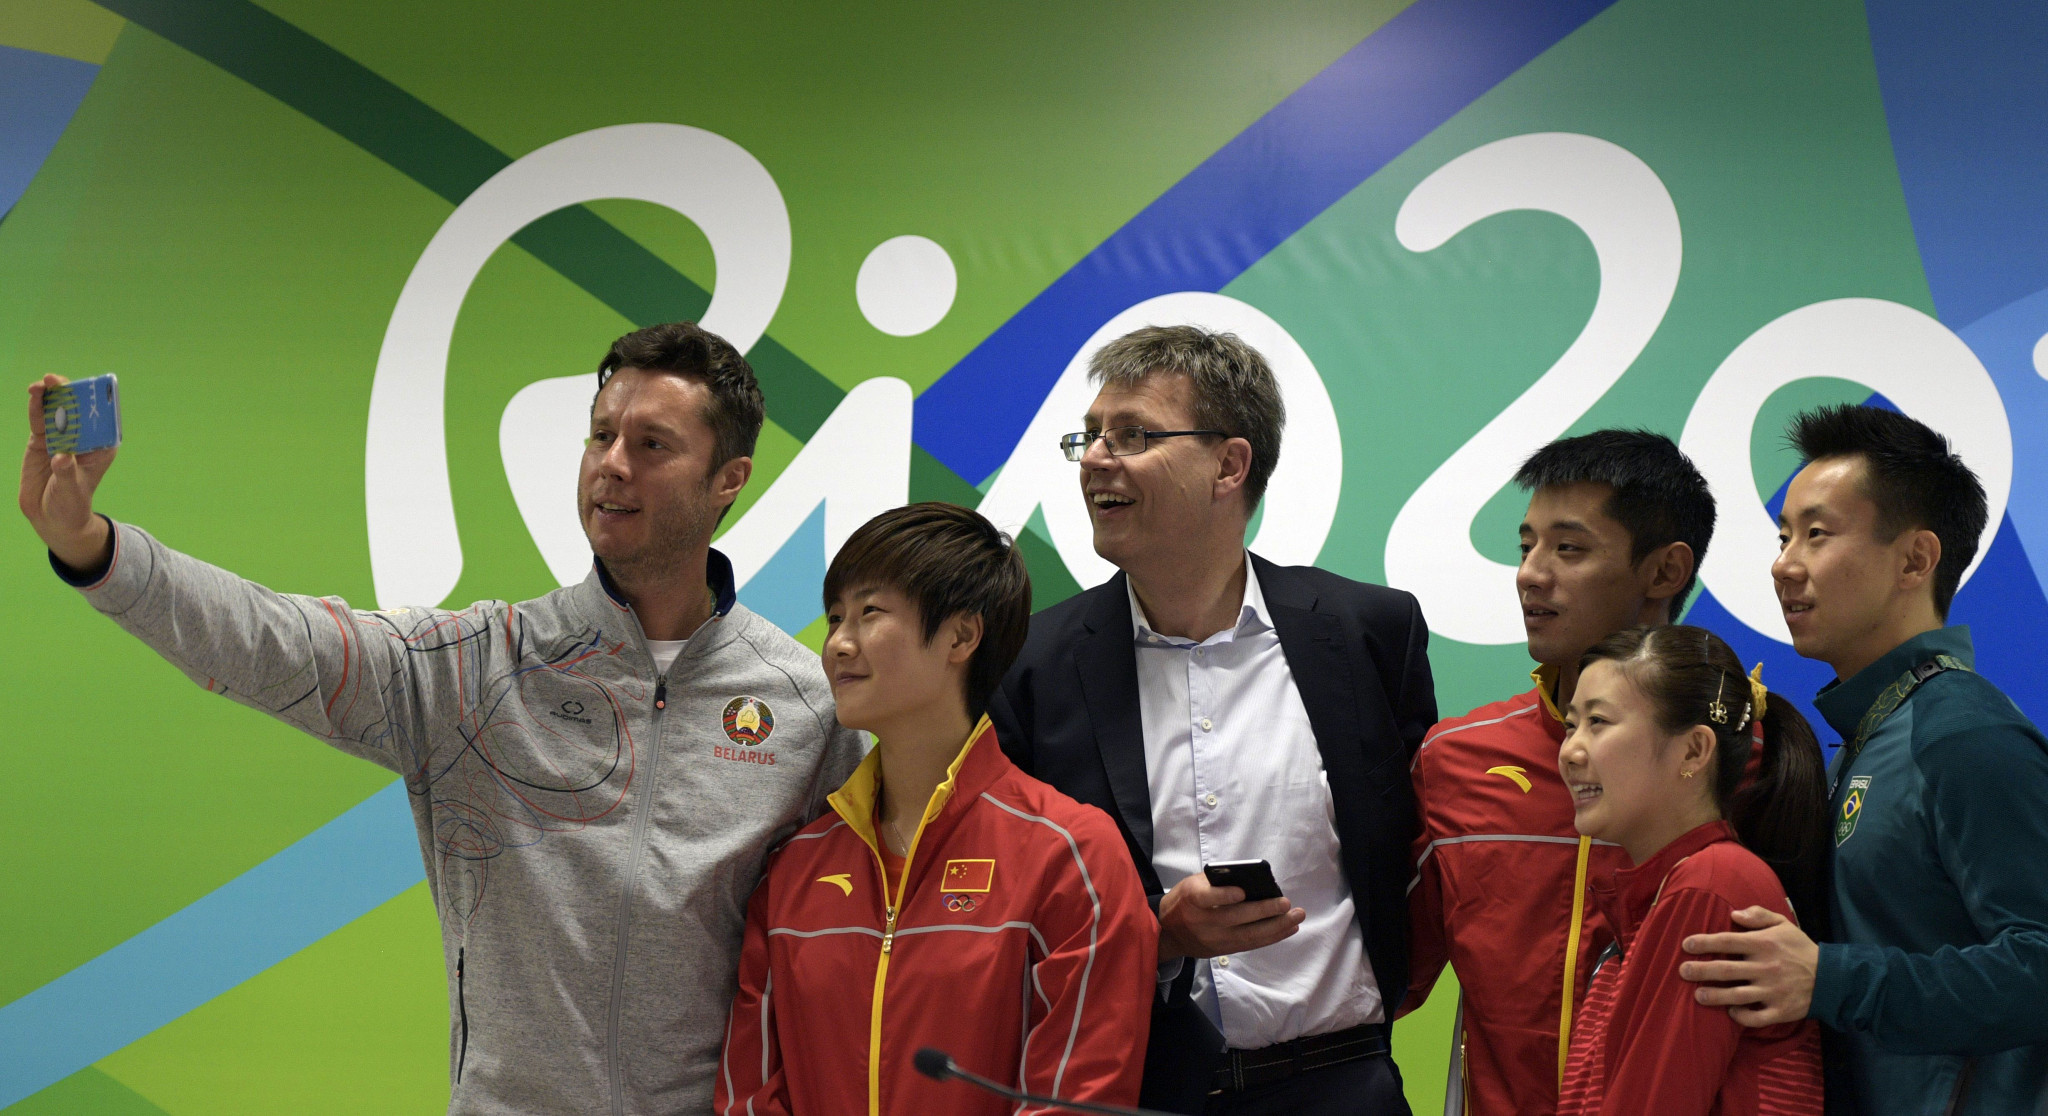 Thomas Weikert, centre, poses with leading table tennis players during Rio 2016 ©Getty Images